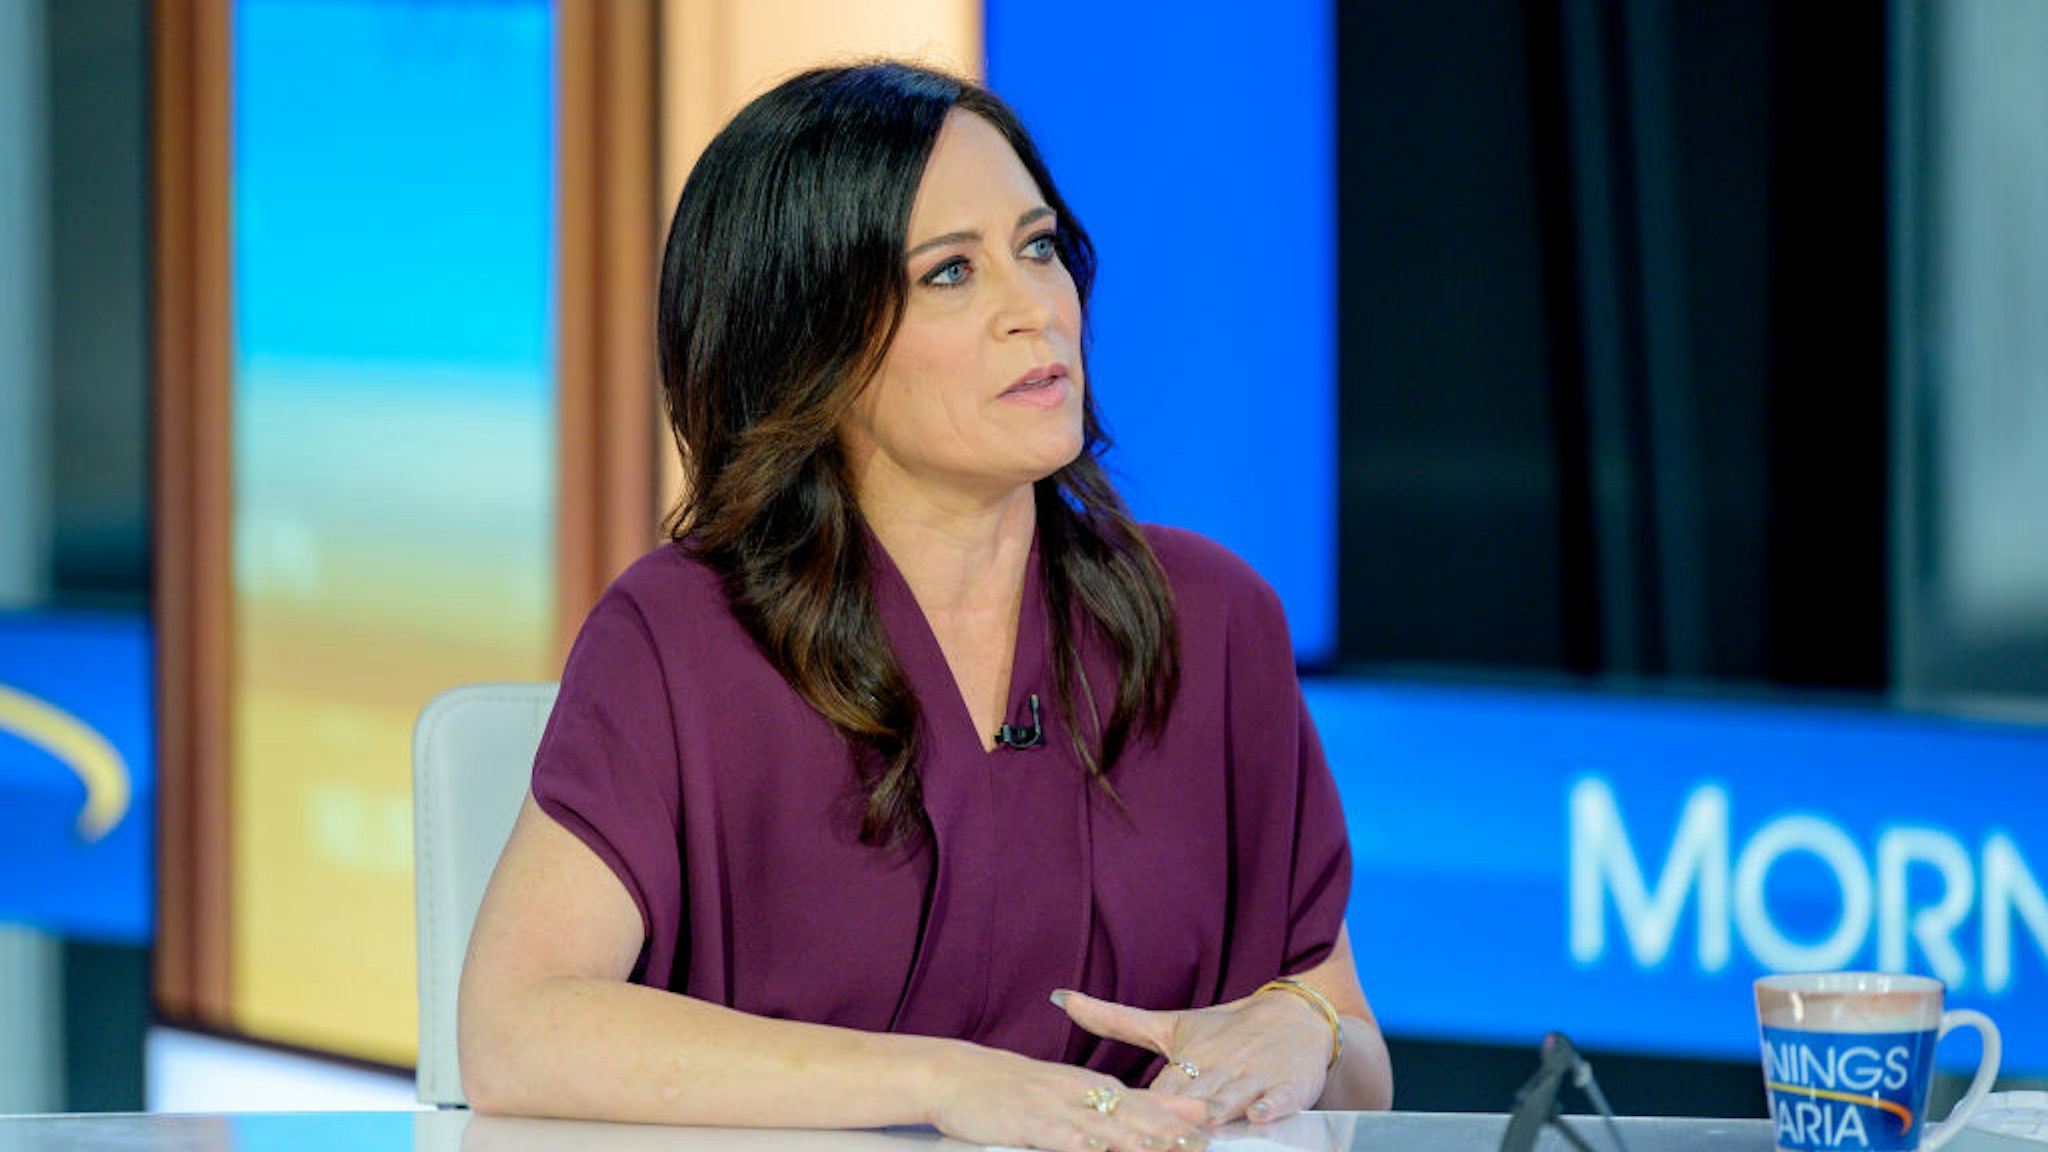 NEW YORK, NEW YORK - SEPTEMBER 23: White House Press Secretary Stephanie Grisham visits "Mornings With Maria" with Anchor Maria Bartiromo at Fox Business Network Studios on September 23, 2019 in New York City. (Photo by Roy Rochlin/Getty Images)